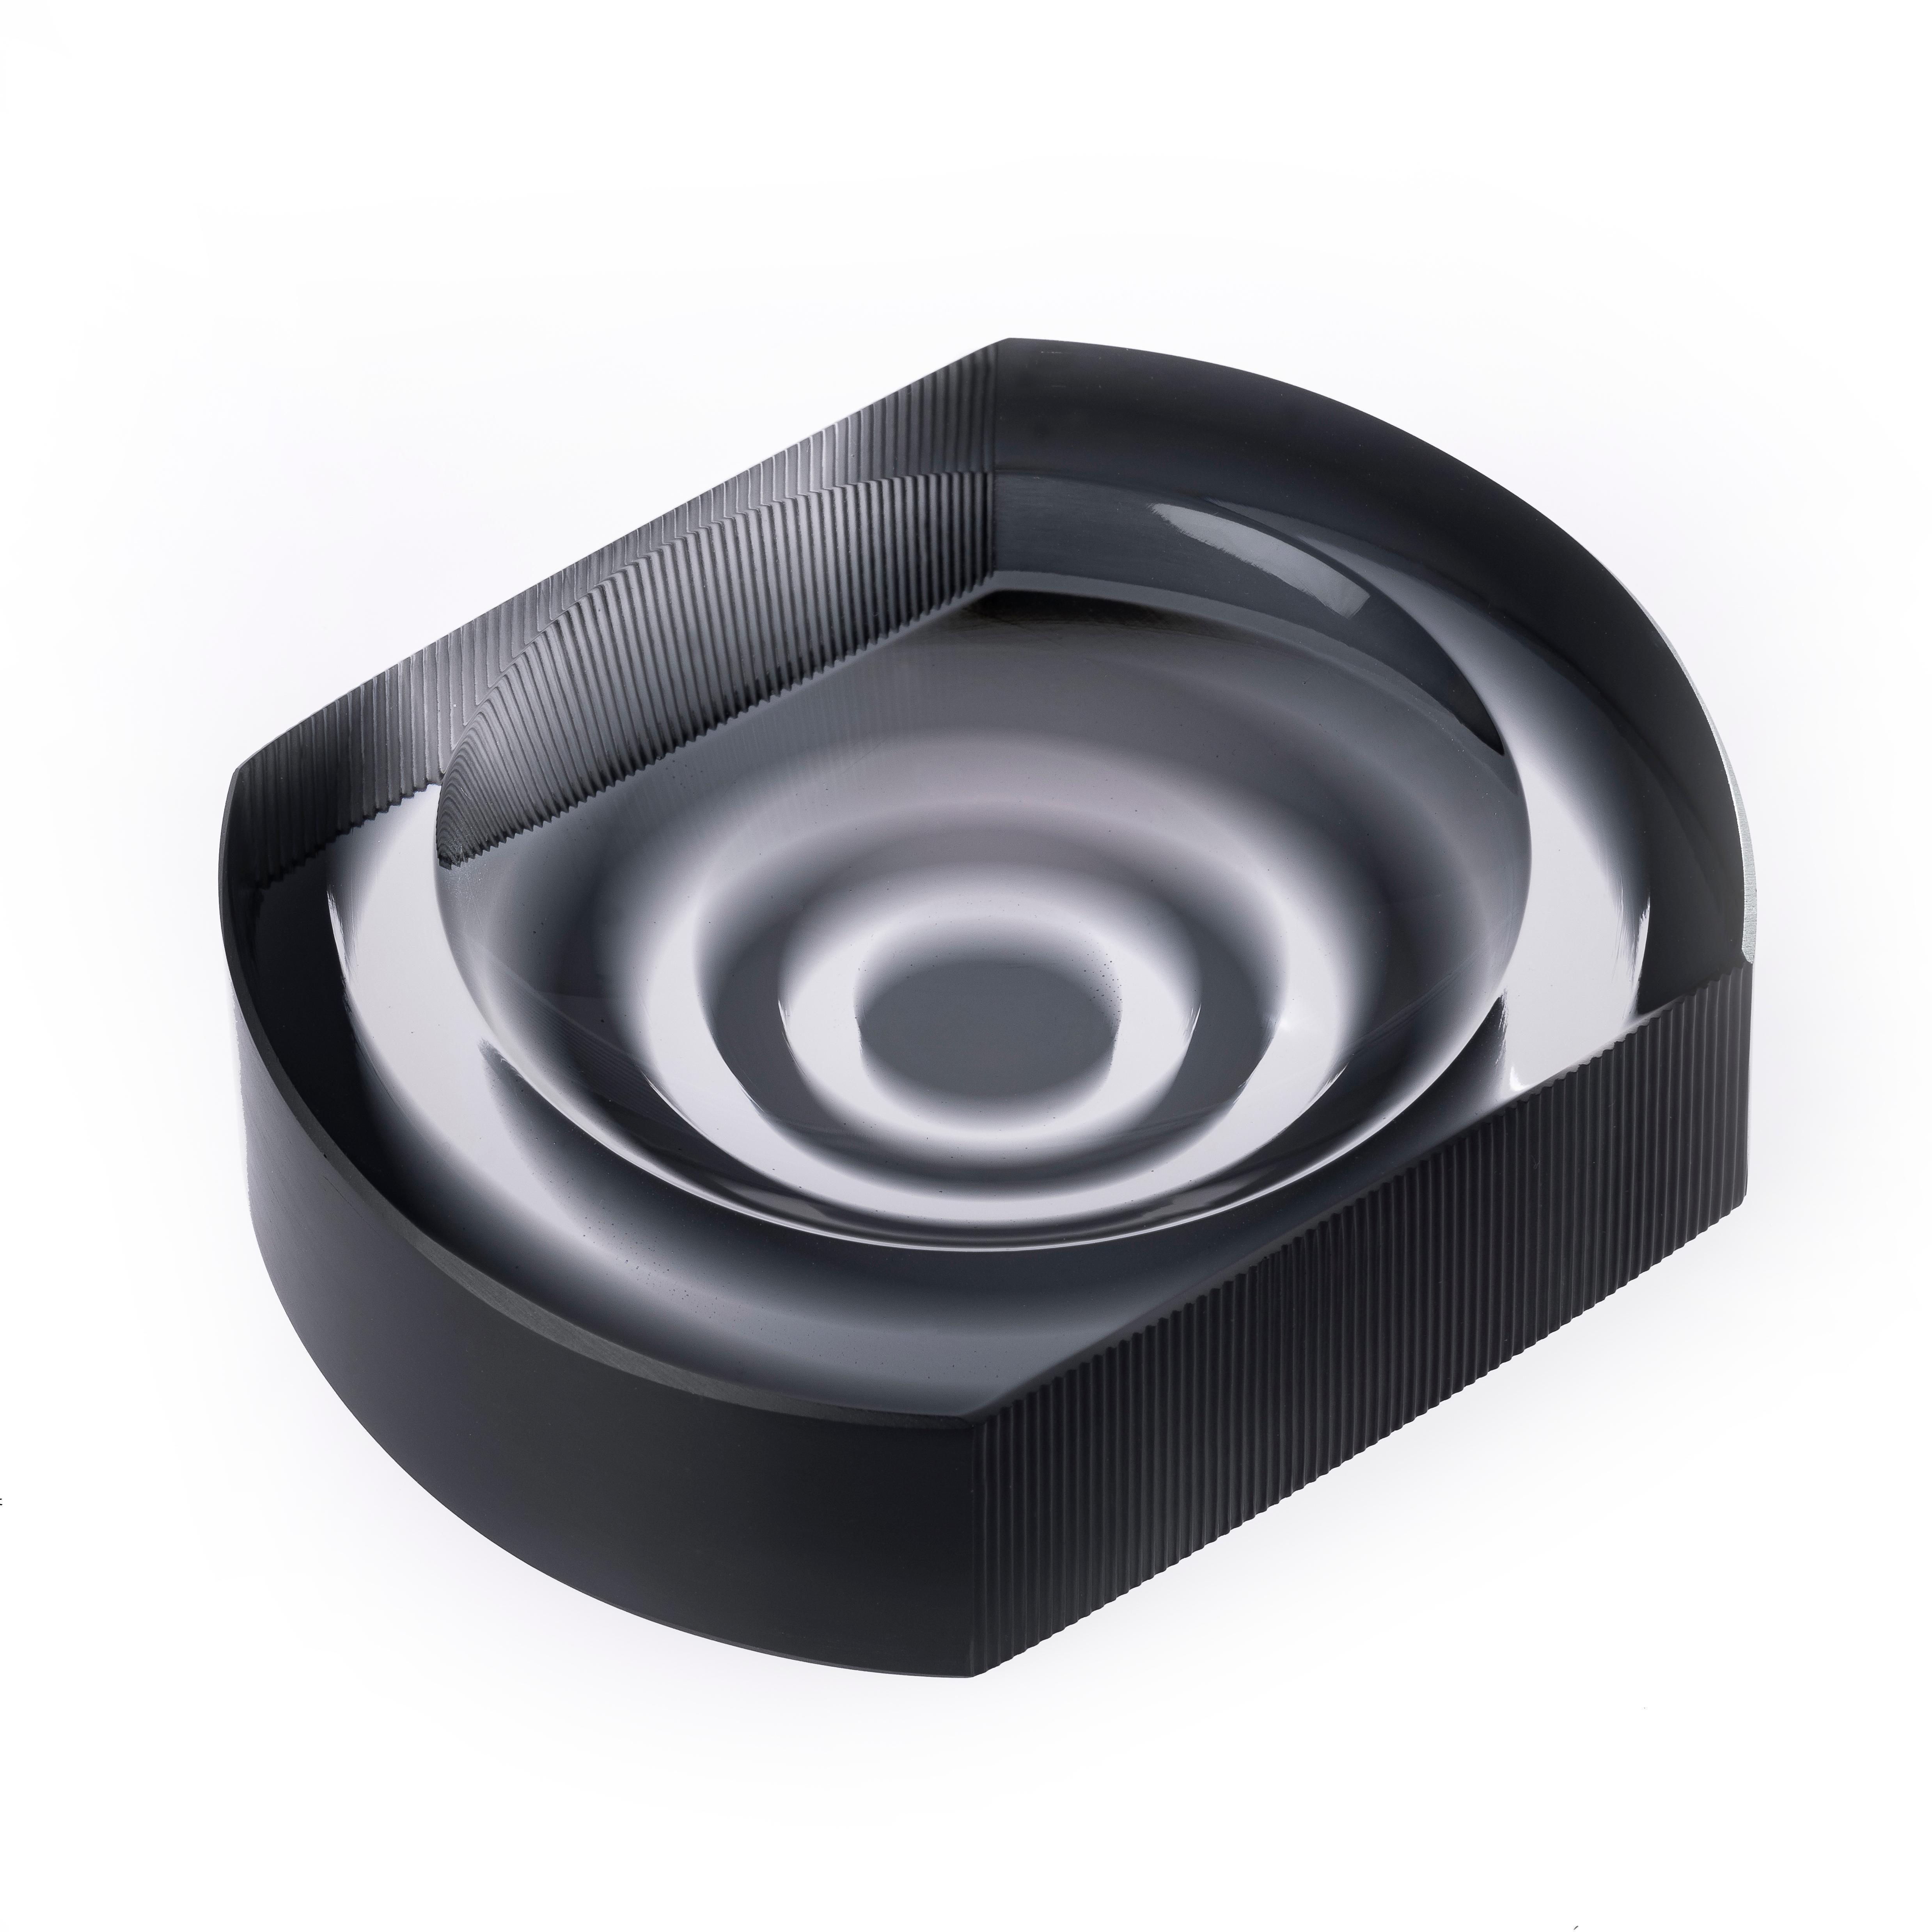 21st century Federico Peri IRIDE CUT ashtray Murano glass various colors.
Iride is a collection of ashtrays comprised of three different circular
models with engravings drawn from the collection of pots, plus one
— Iride Cut — with two flat sides